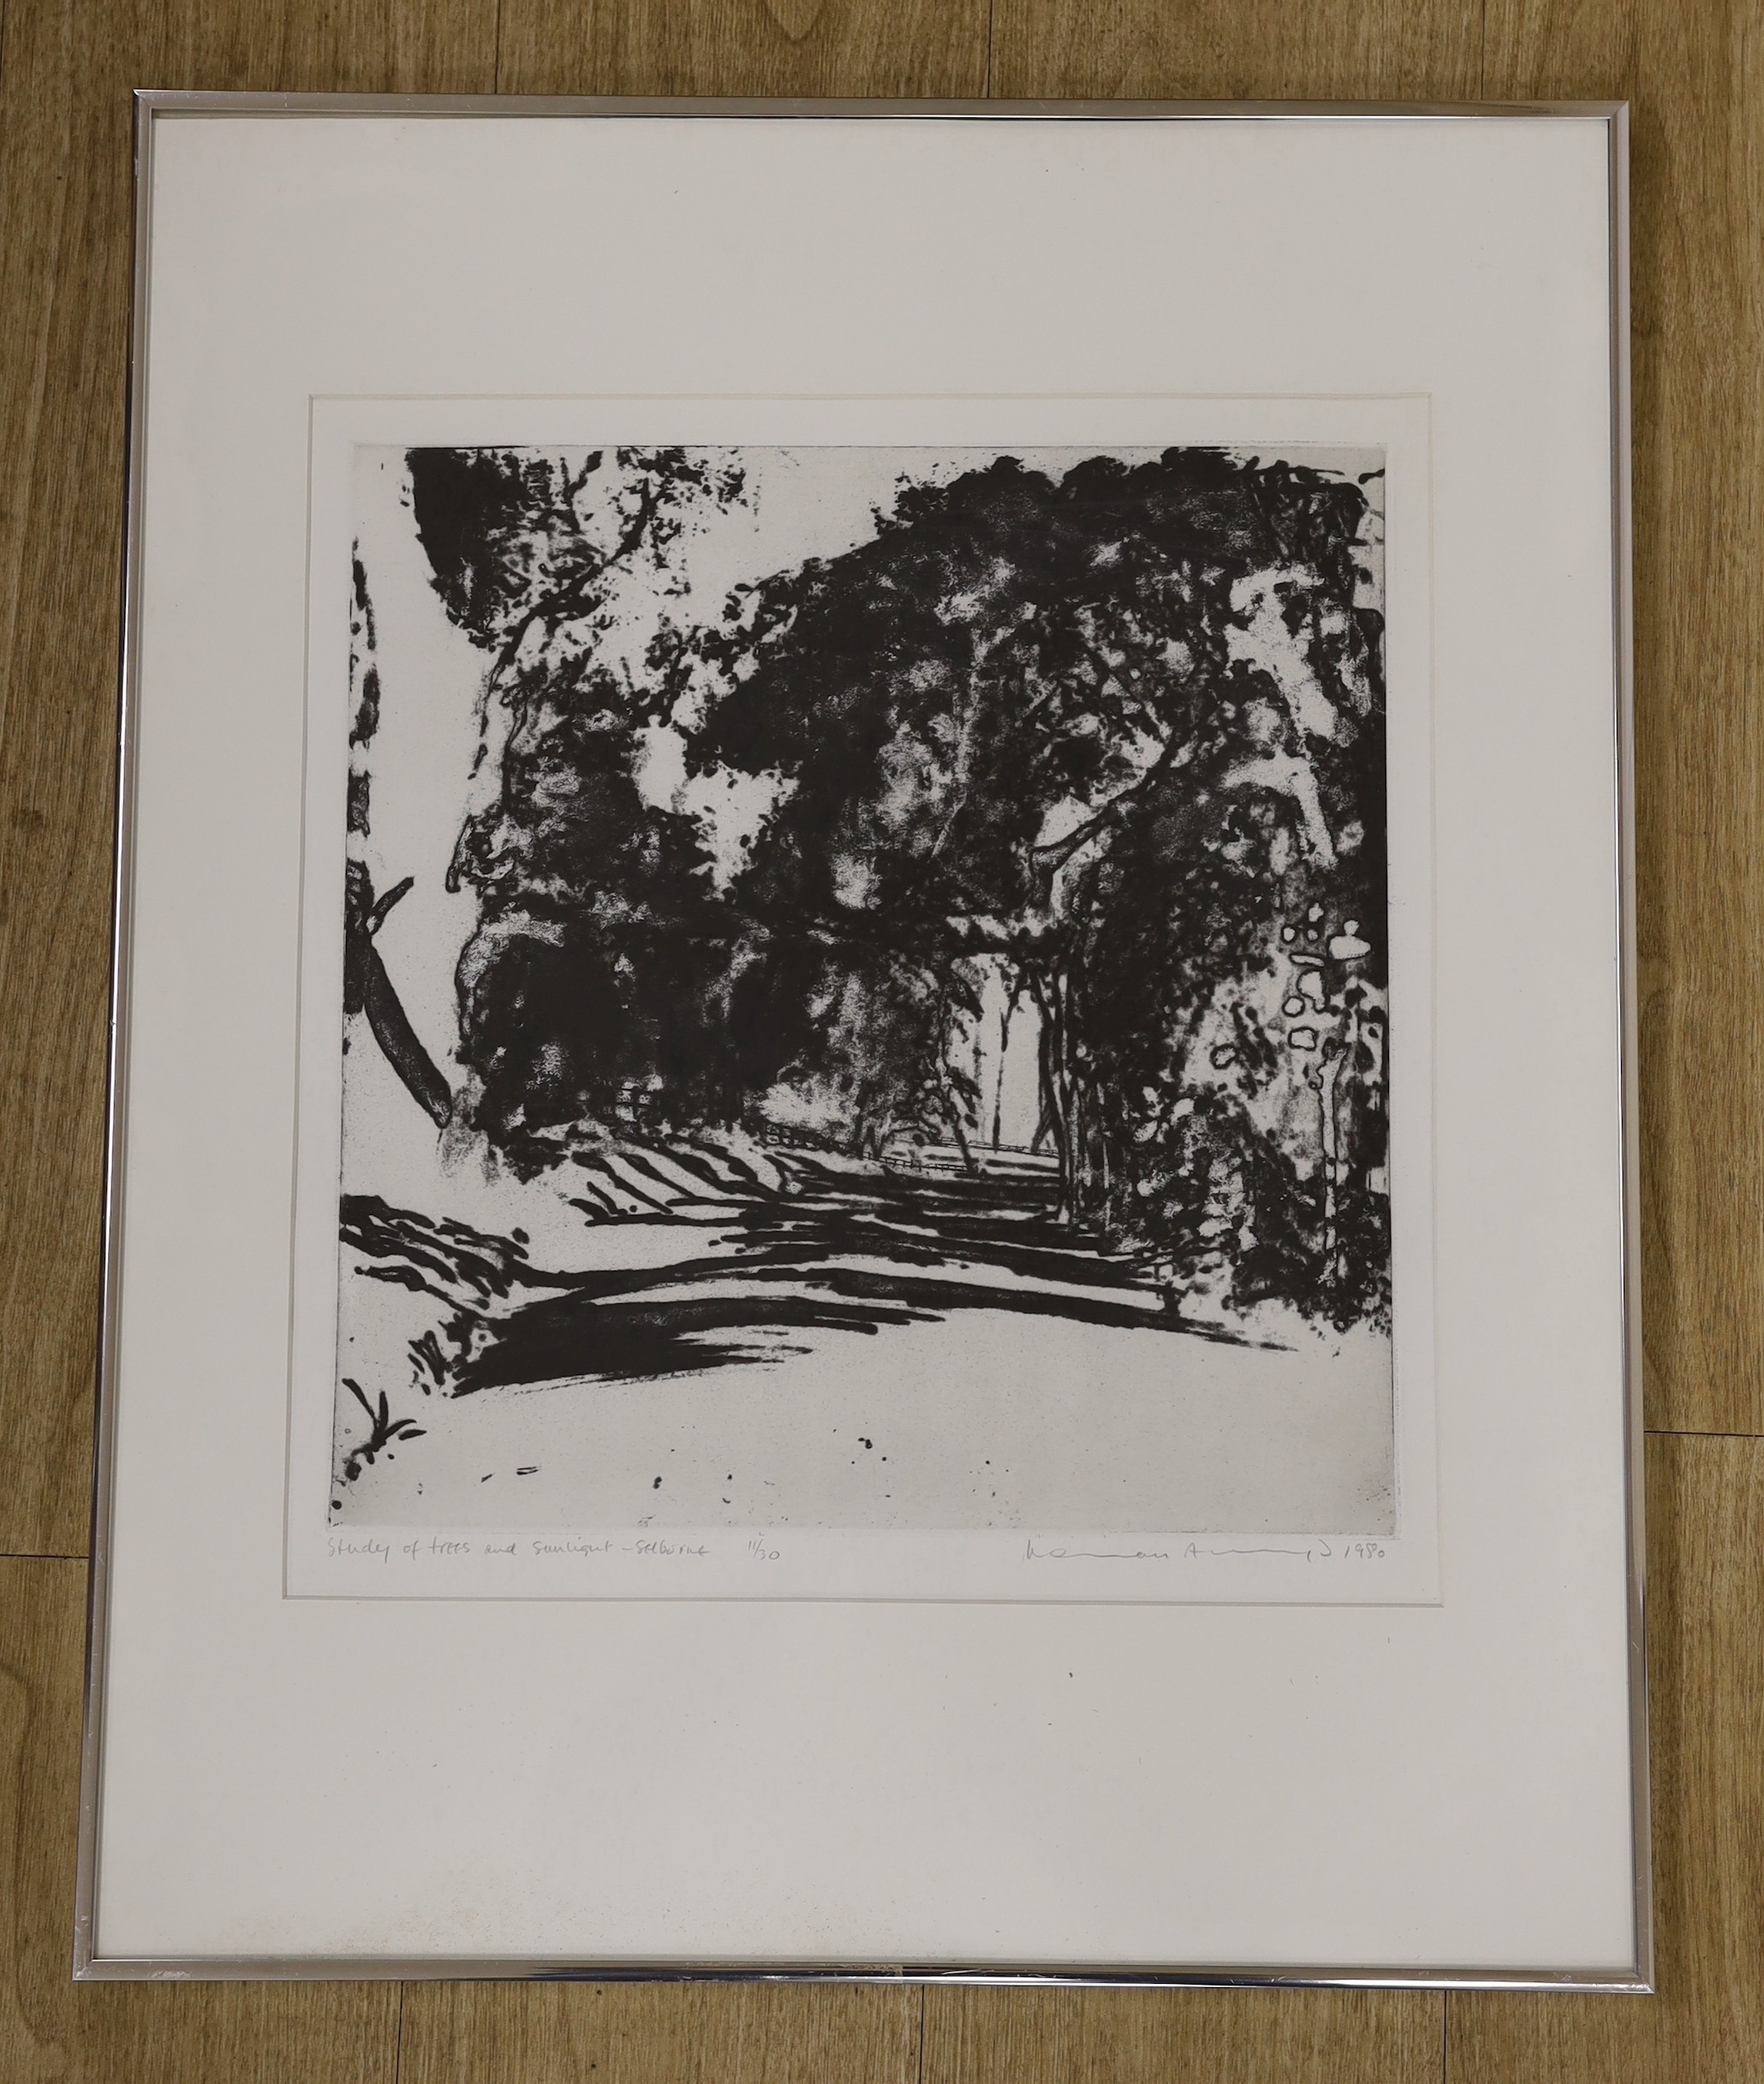 Norman Ackroyd (b.1938-), etching and aquatint, 'Study of trees and sunlight - Selborne', signed in pencil and dated 1980, 11/30, 43 x 40cm